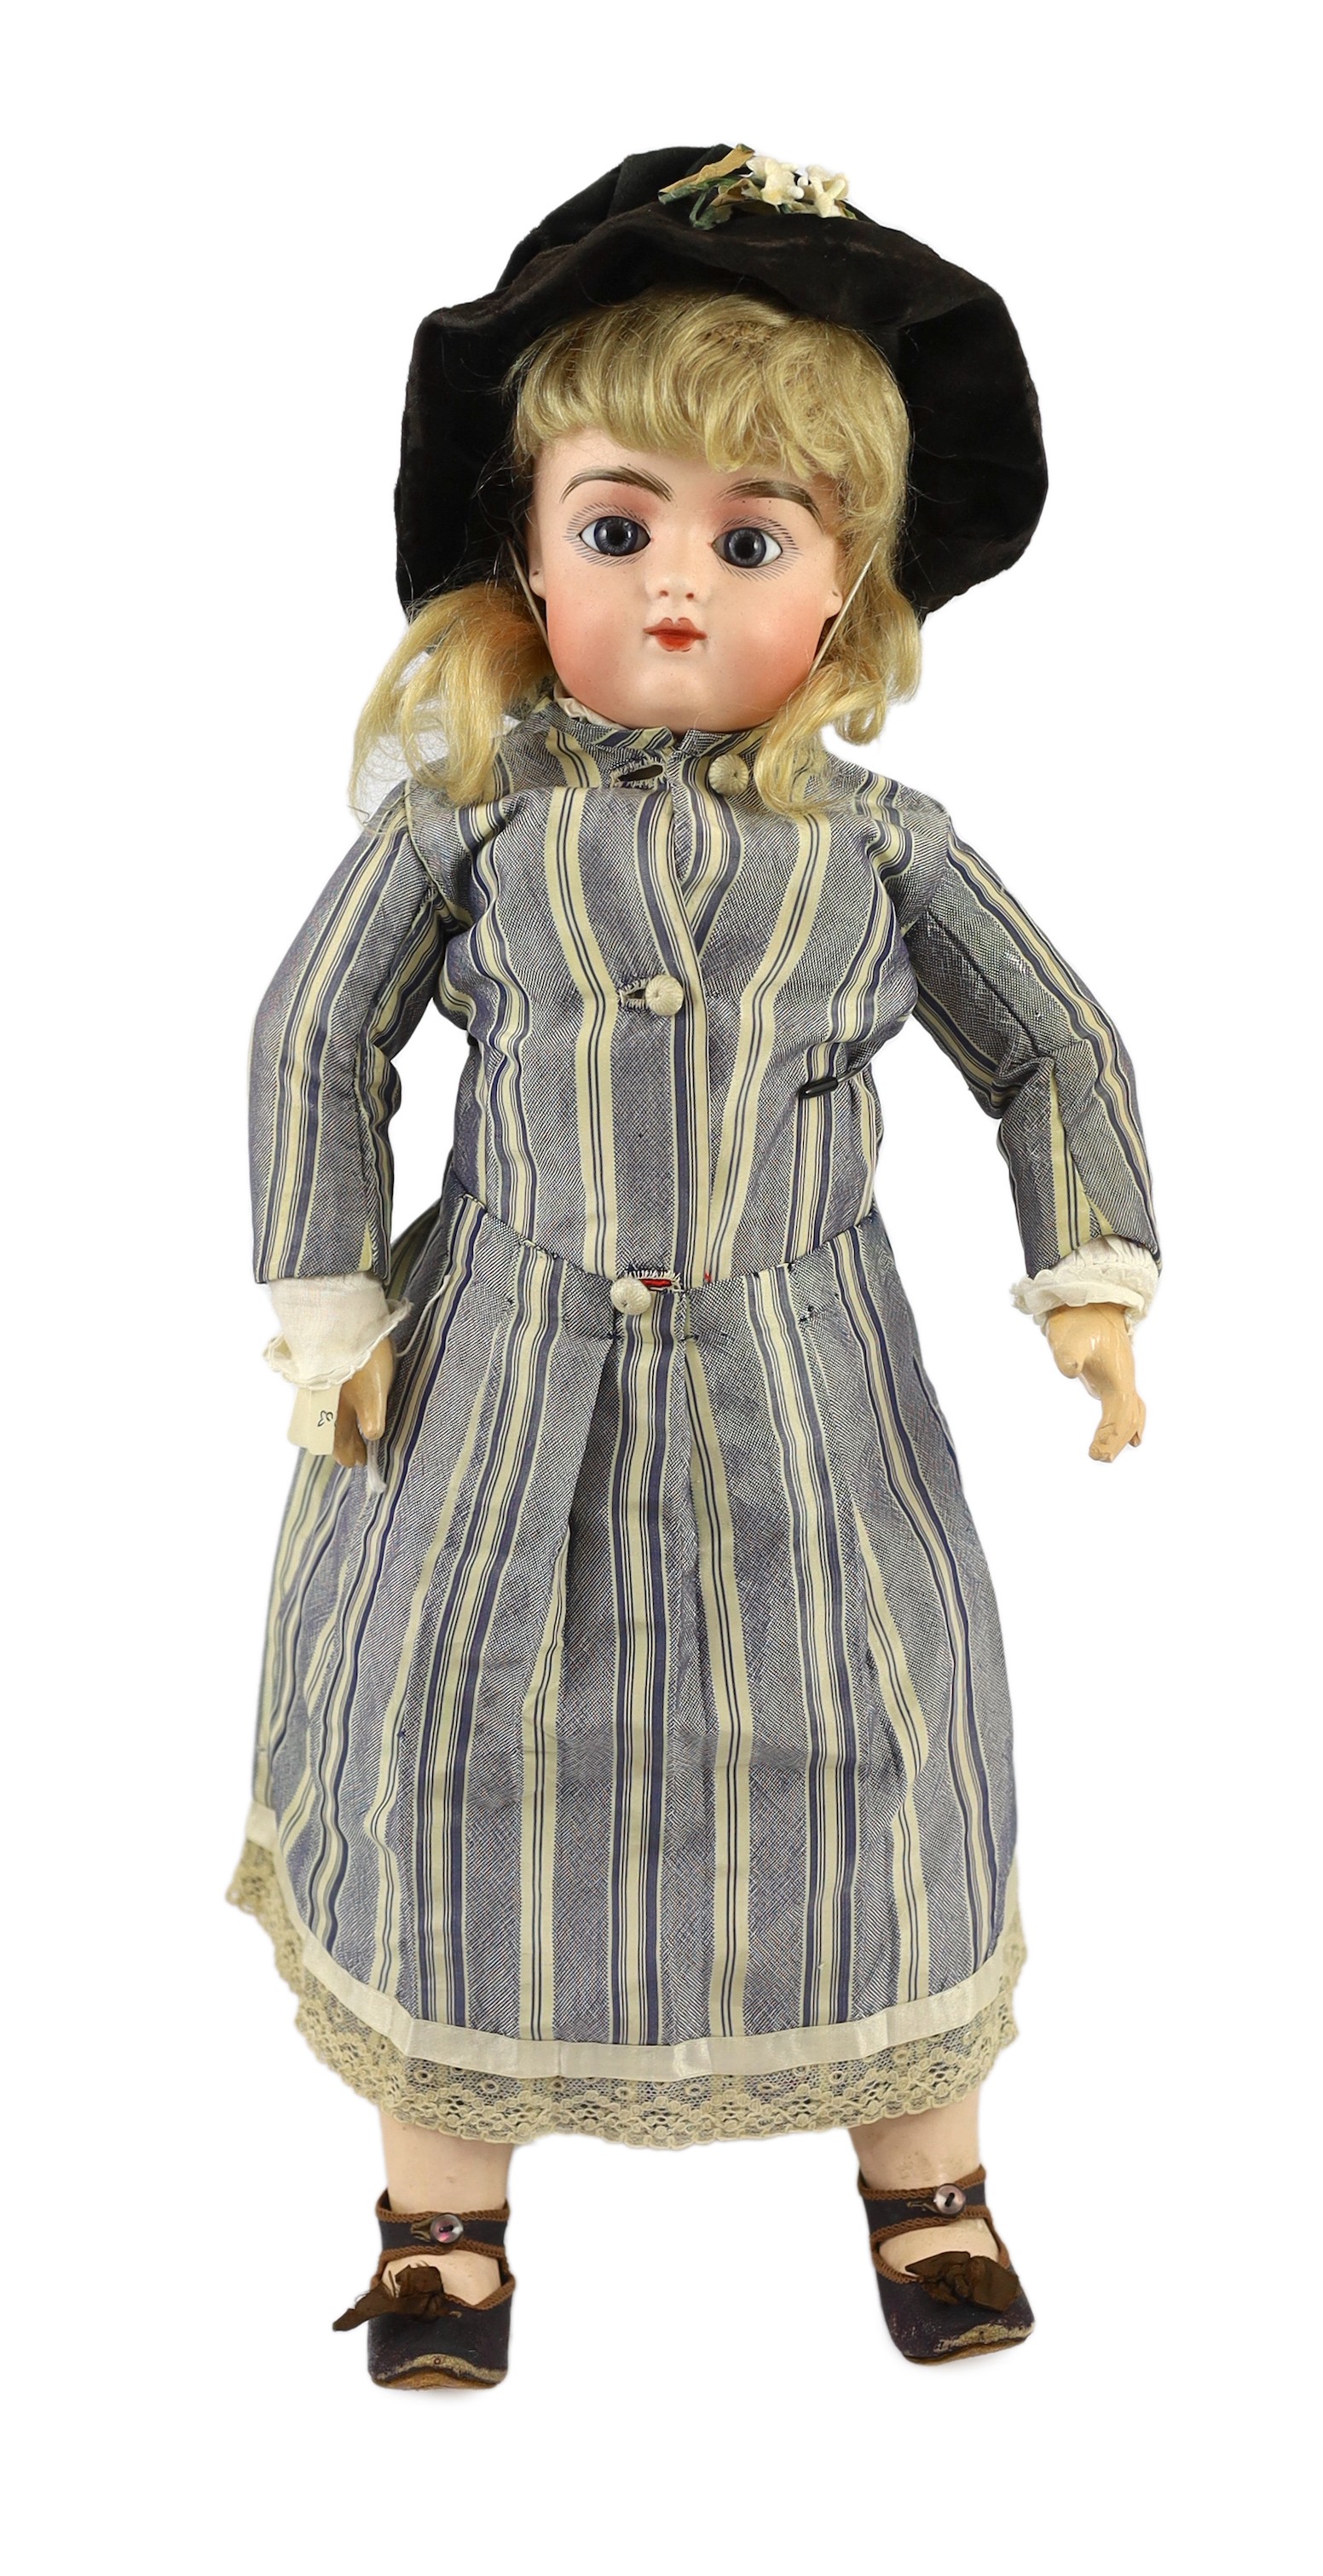 A Pintel and Godchaux bisque fashion doll, French, circa 1890, 18in.                                                                                                                                                        